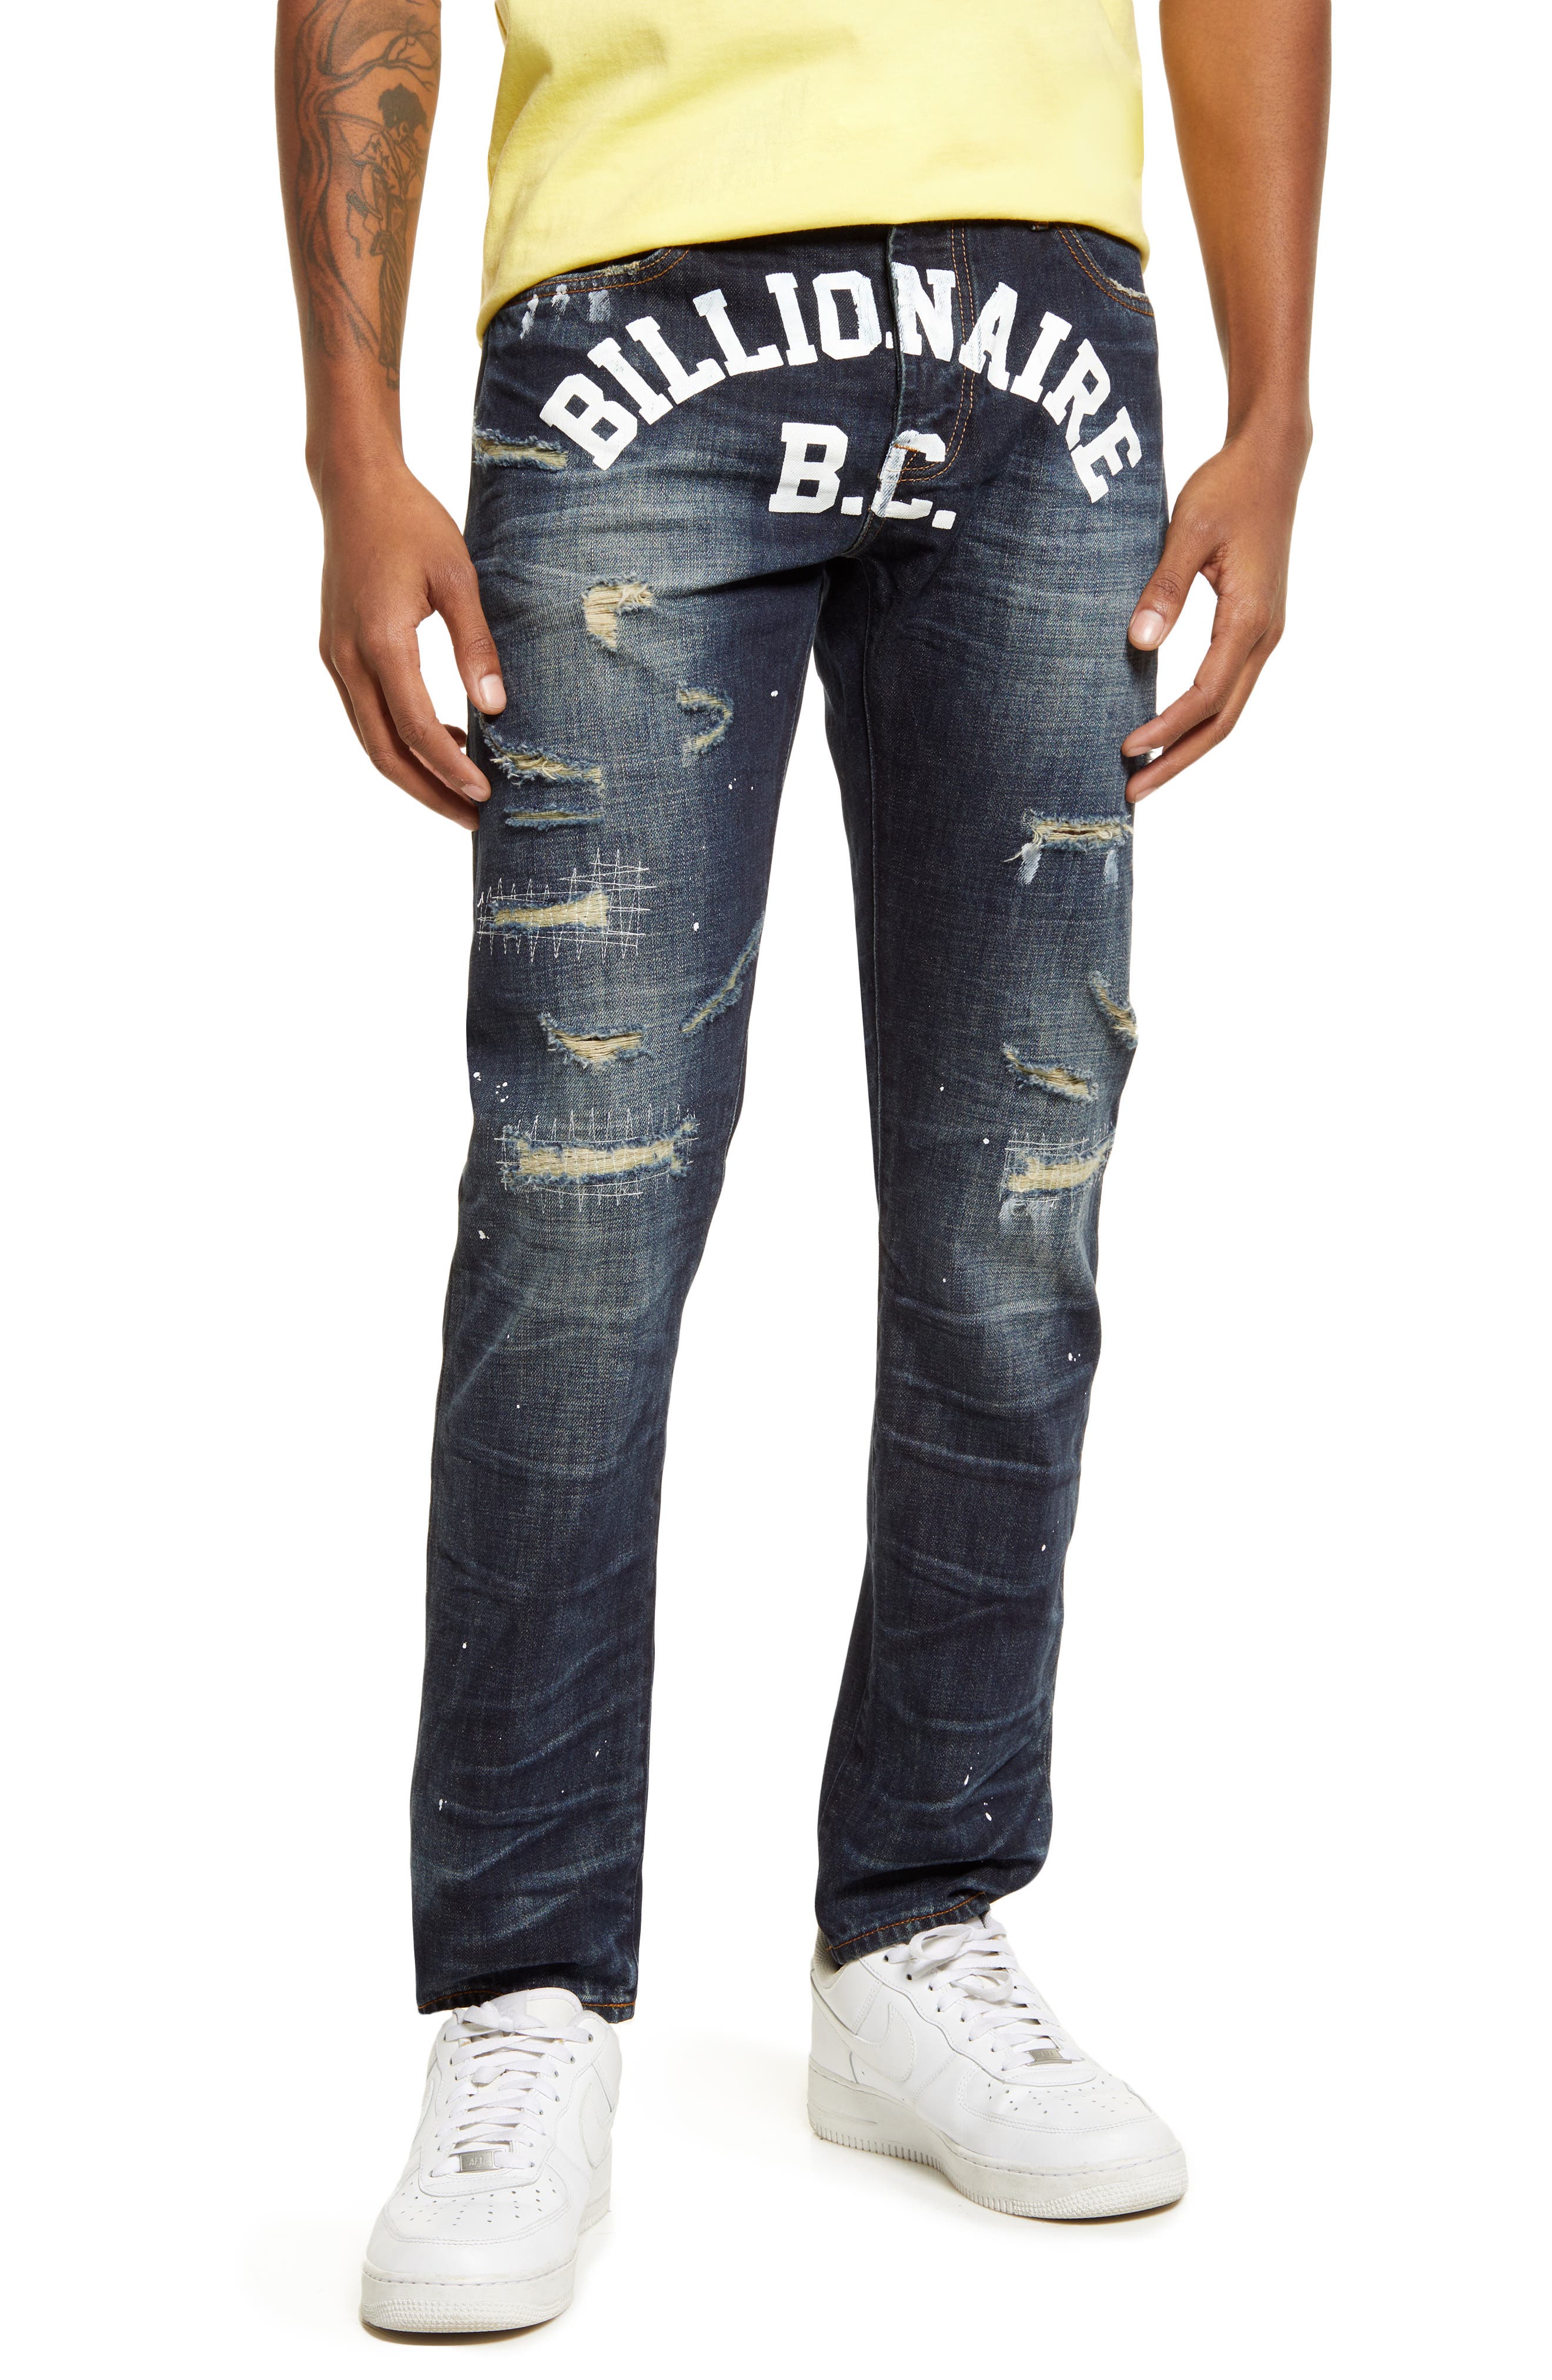 Billionaire Boys Club Men's BB Big Bang Jeans in Rockets at Nordstrom, Size 30